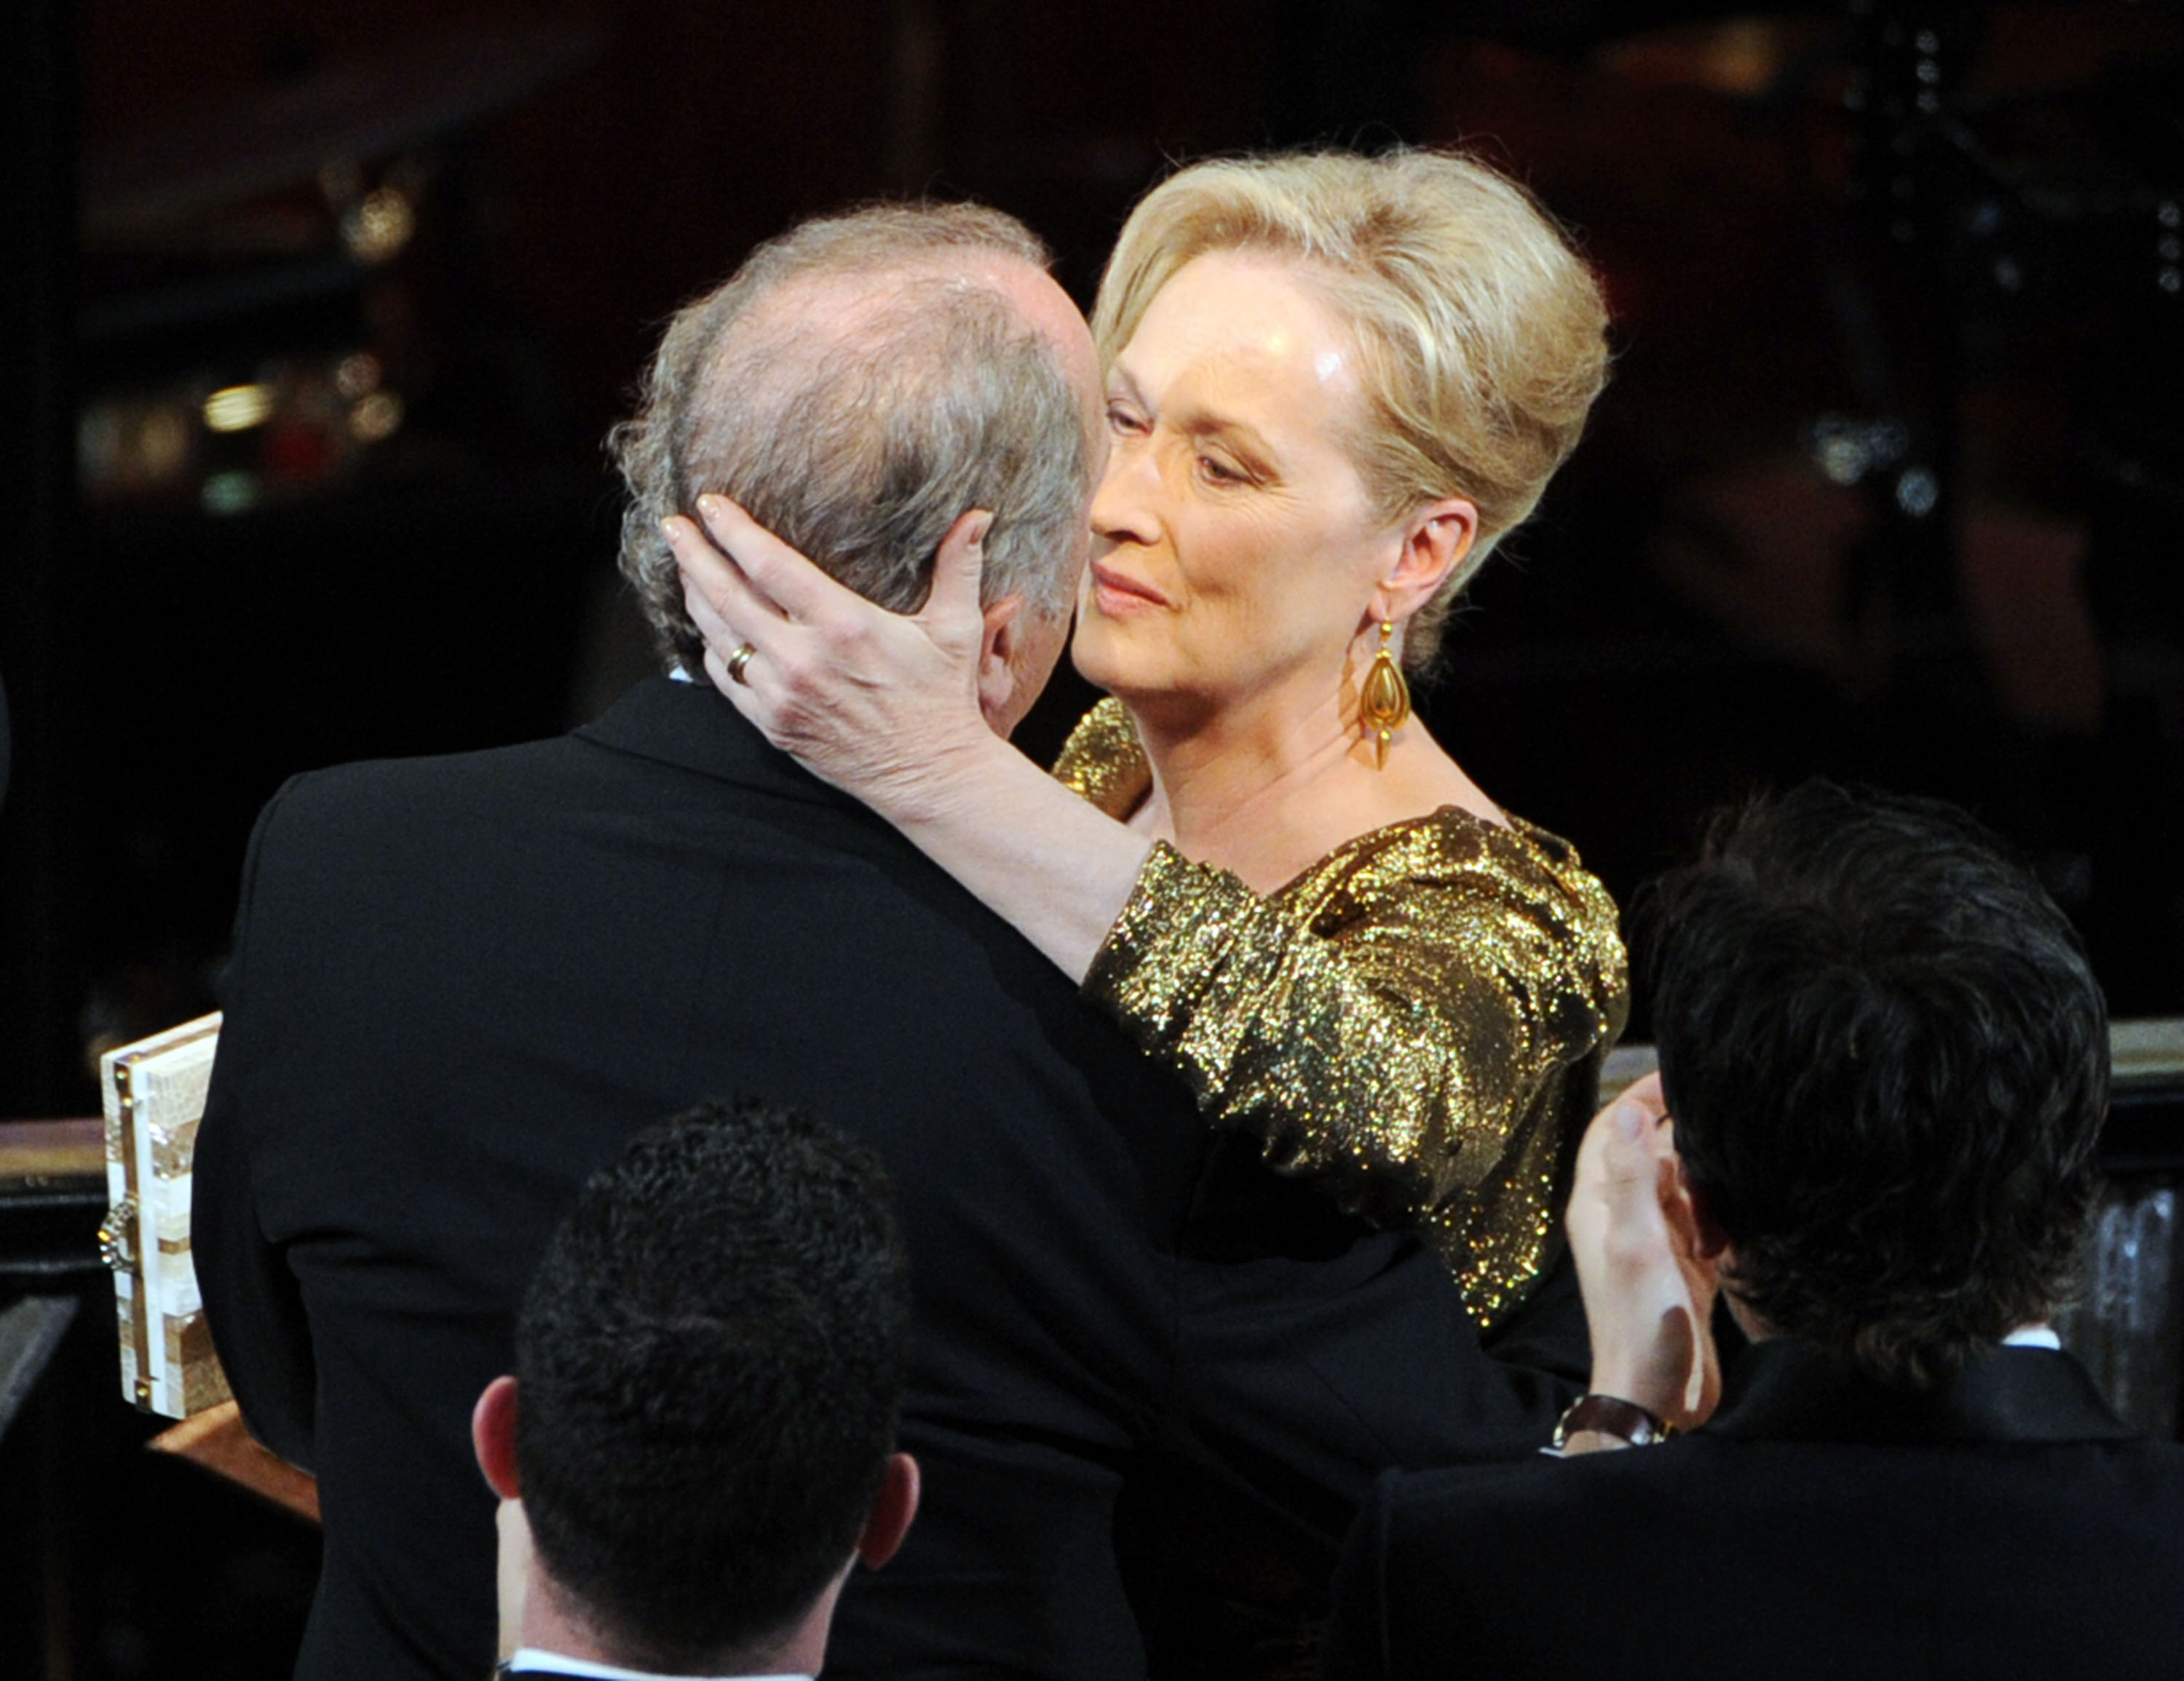 Meryl Streep and Don Gummer during the 84th Annual Academy Awards at the Hollywood & Highland Center on February 26, 2012 in Hollywood, California. | Source: Getty Images